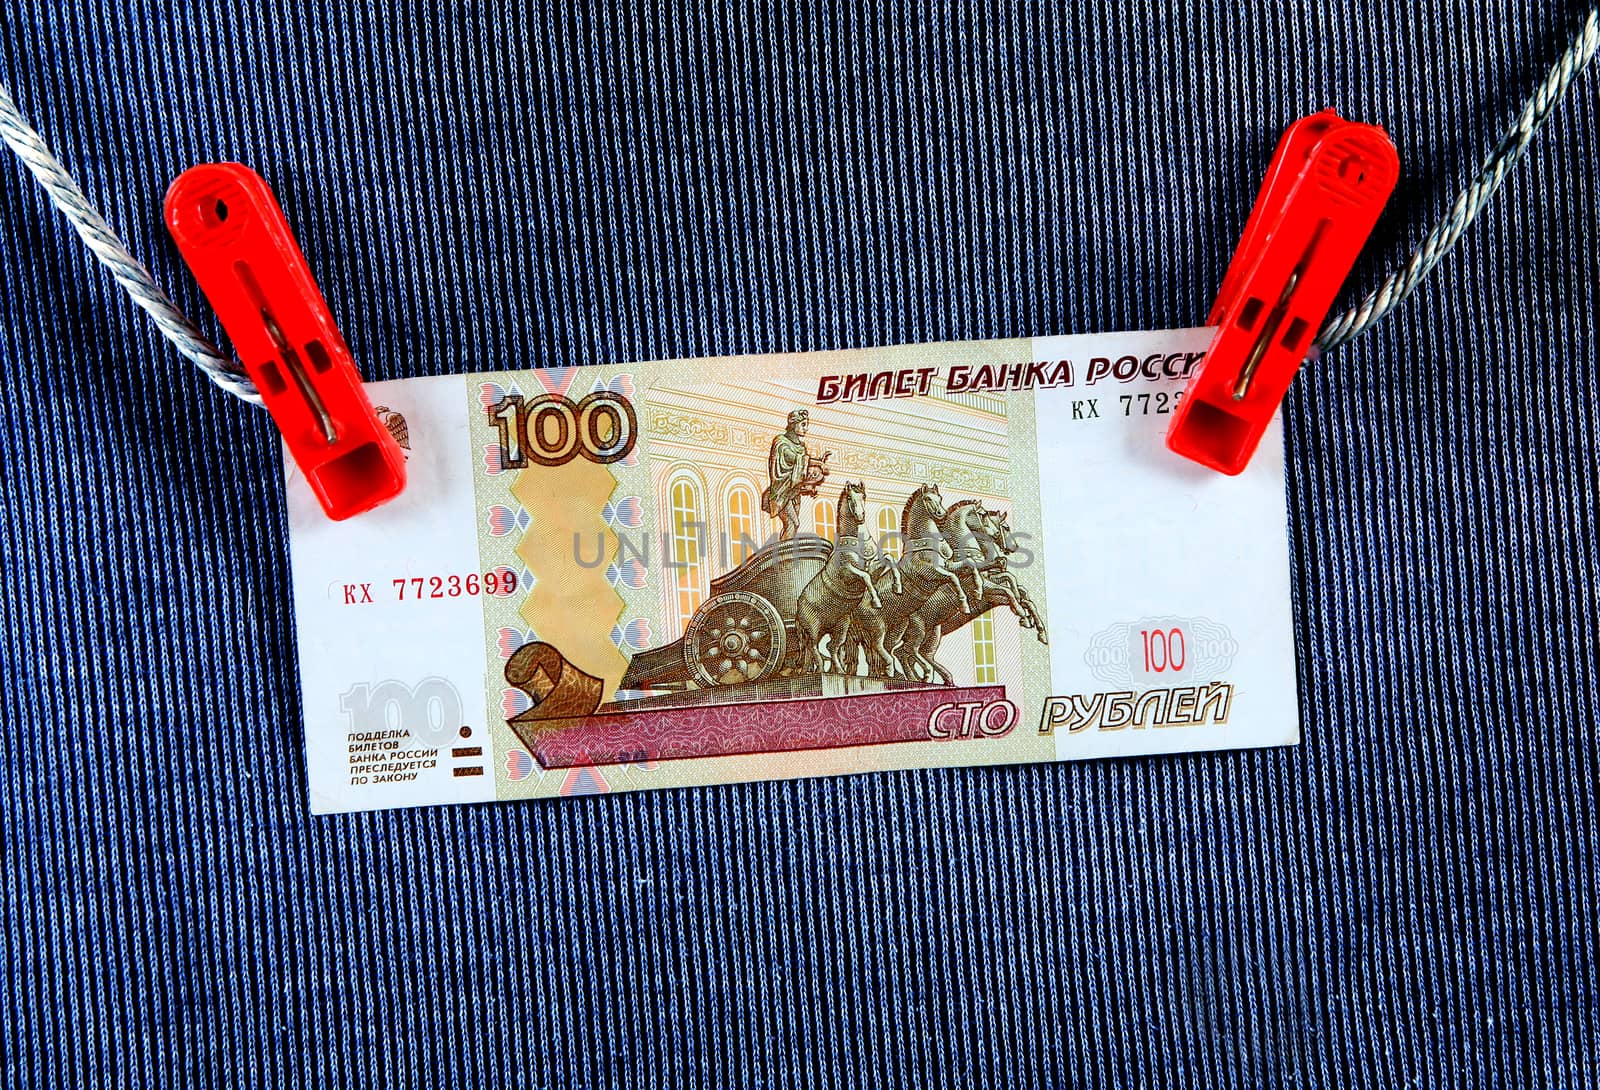 Hundred Roubles on the Rope by sabphoto